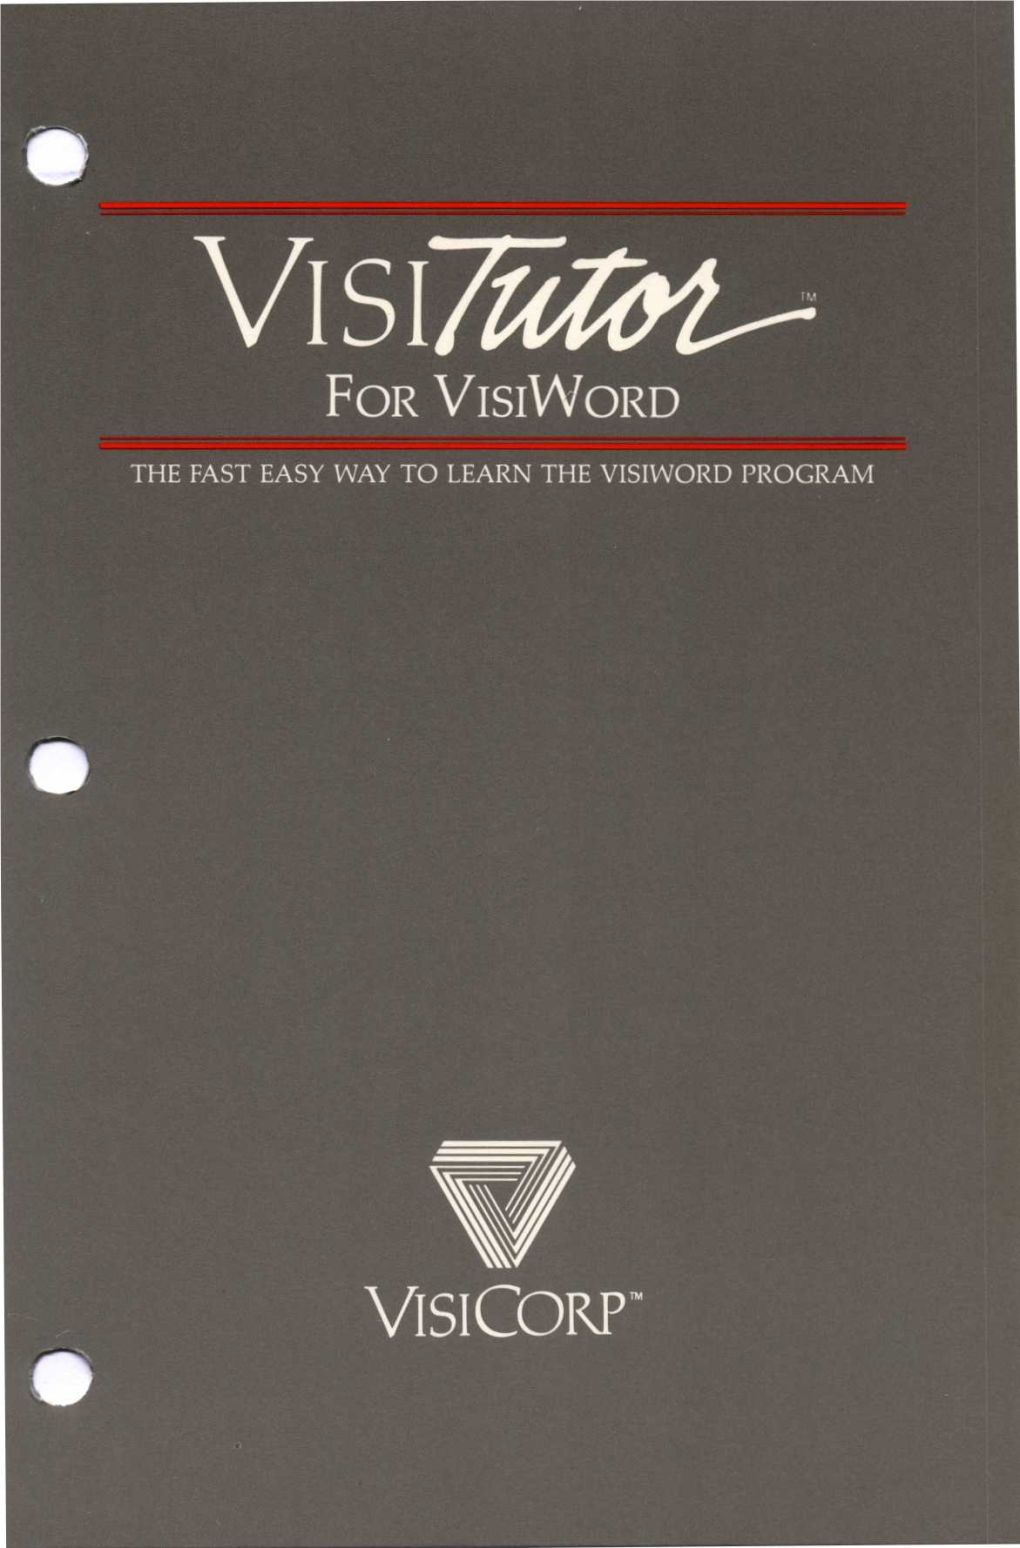 Visicorp TM DISCLAIMER of WARRANTY and LIMITATIONS of LIABILITY the Applications in This Program Have Been Developed and Tested by the Author and Publisher